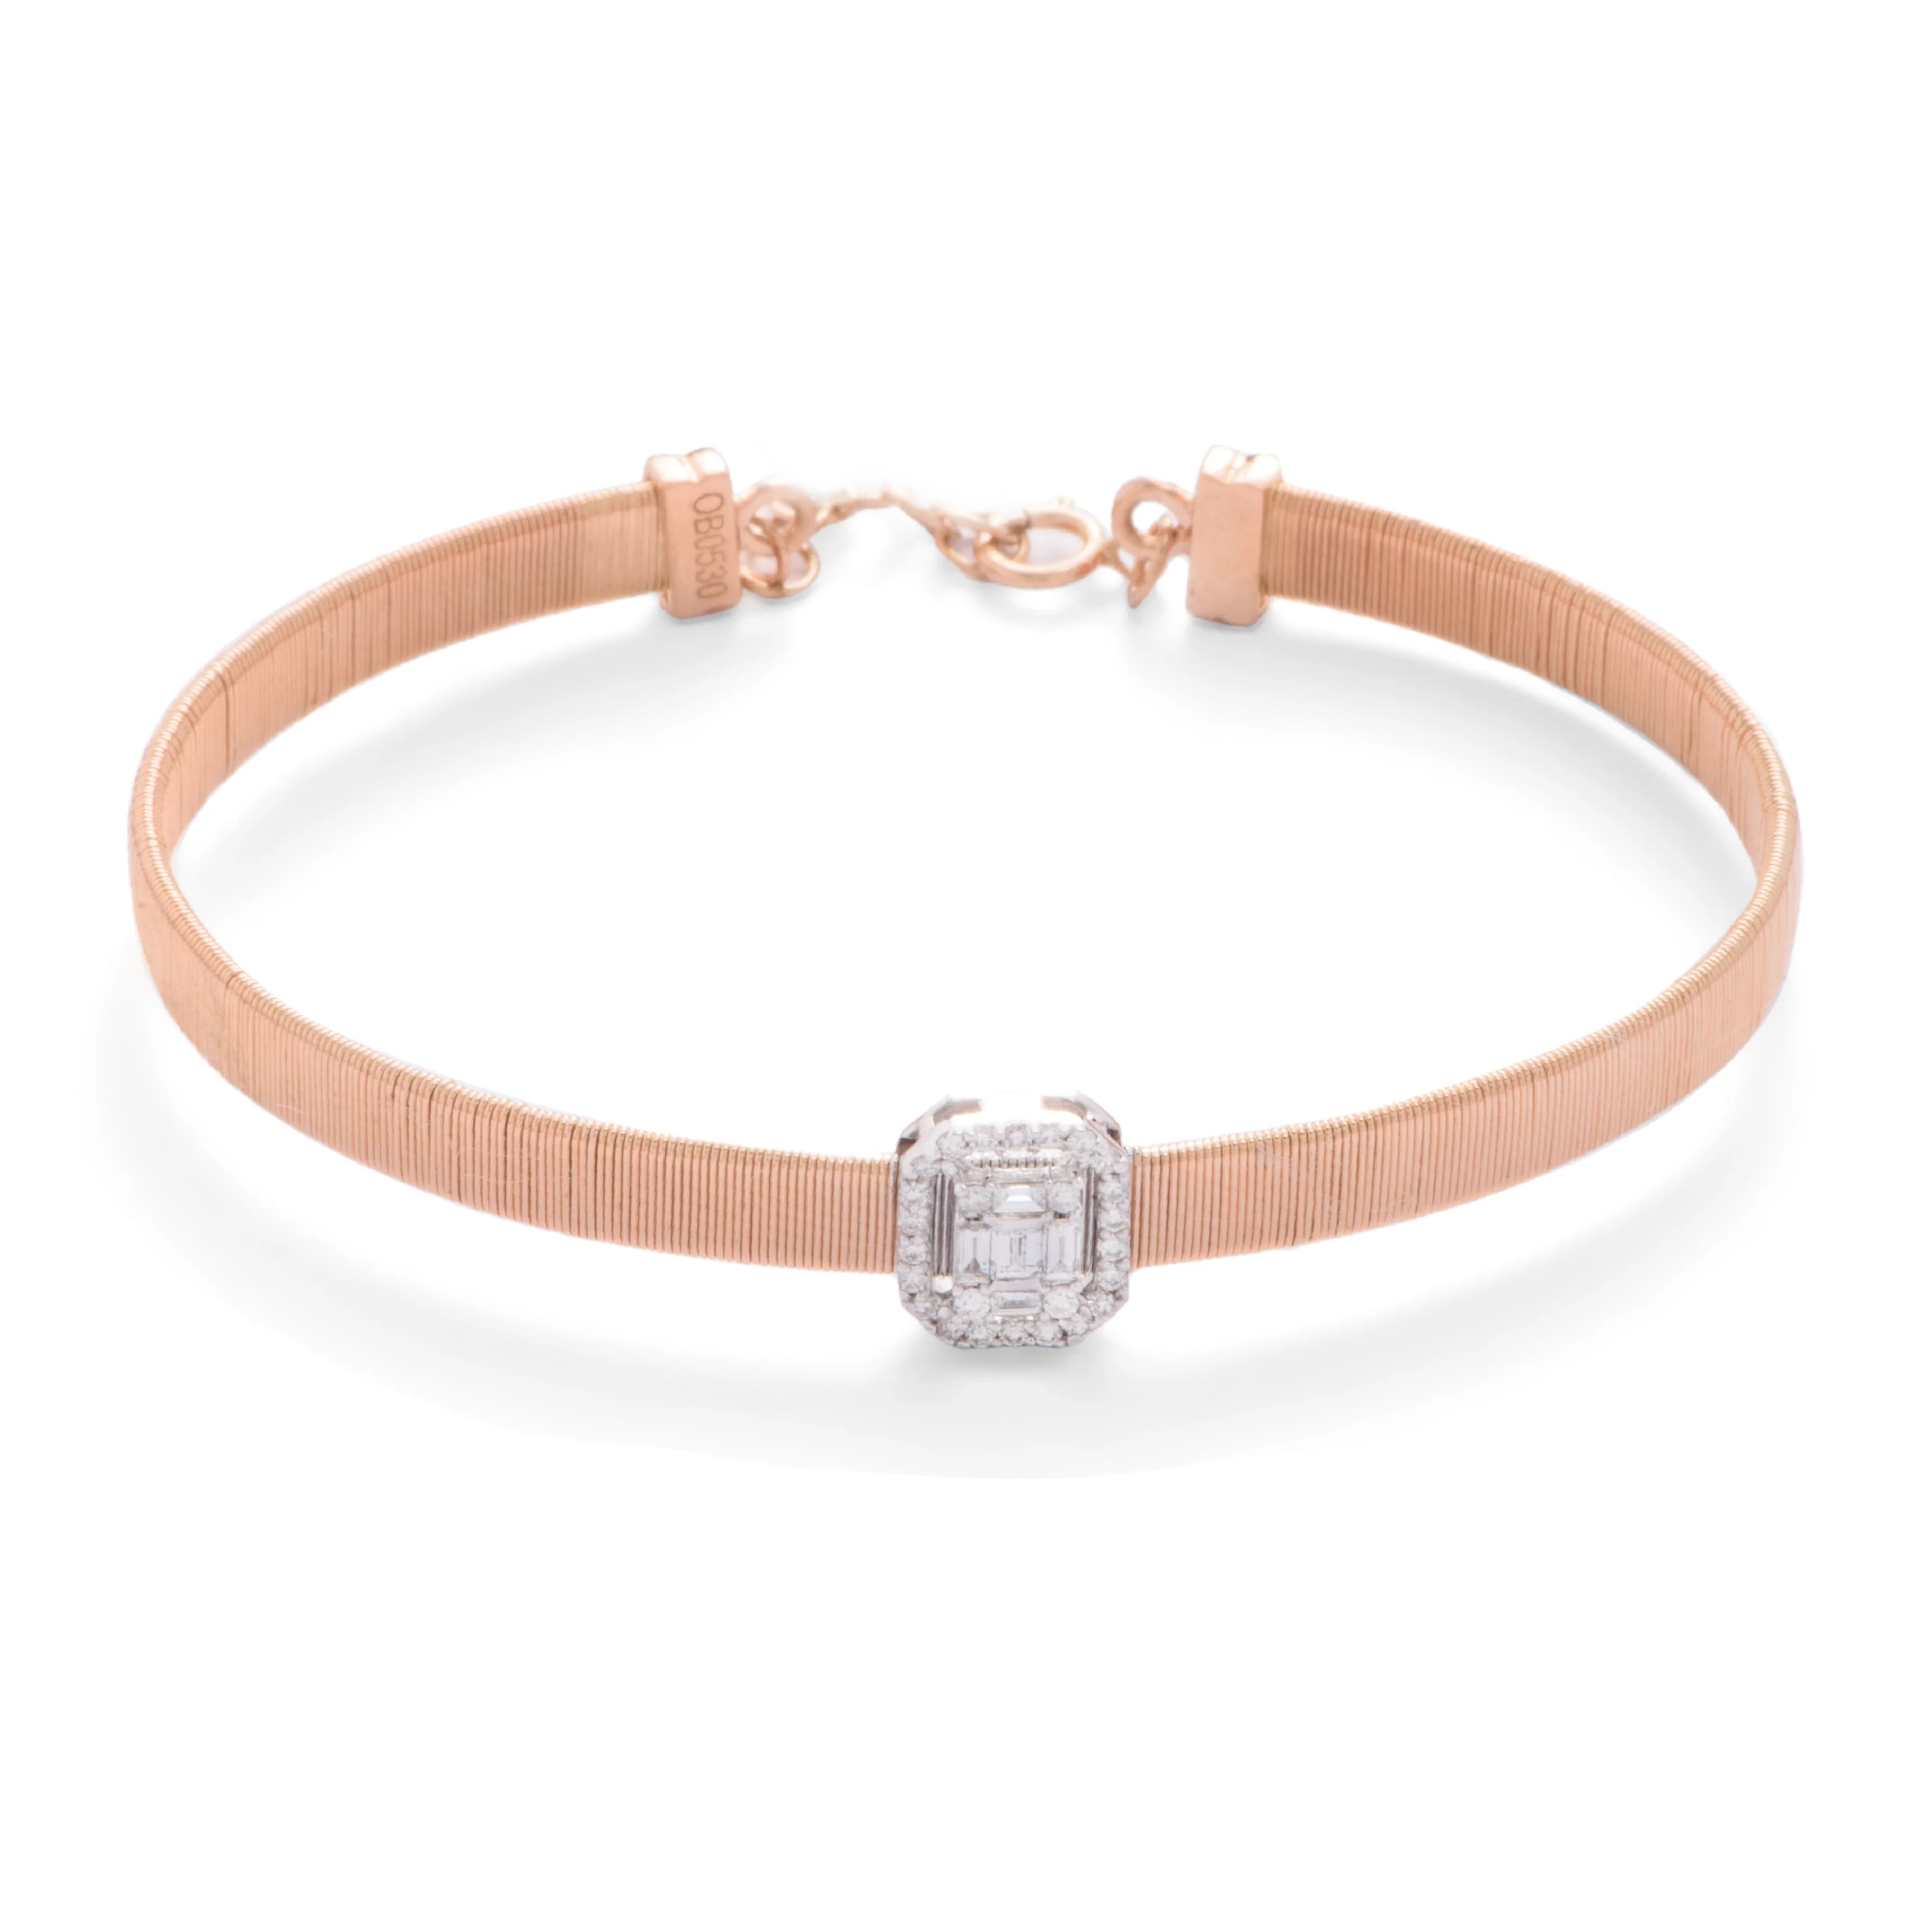 Perfect Central Diamond Coiled Bangle Bracelet in Rose 18 K Gold - S-X29B